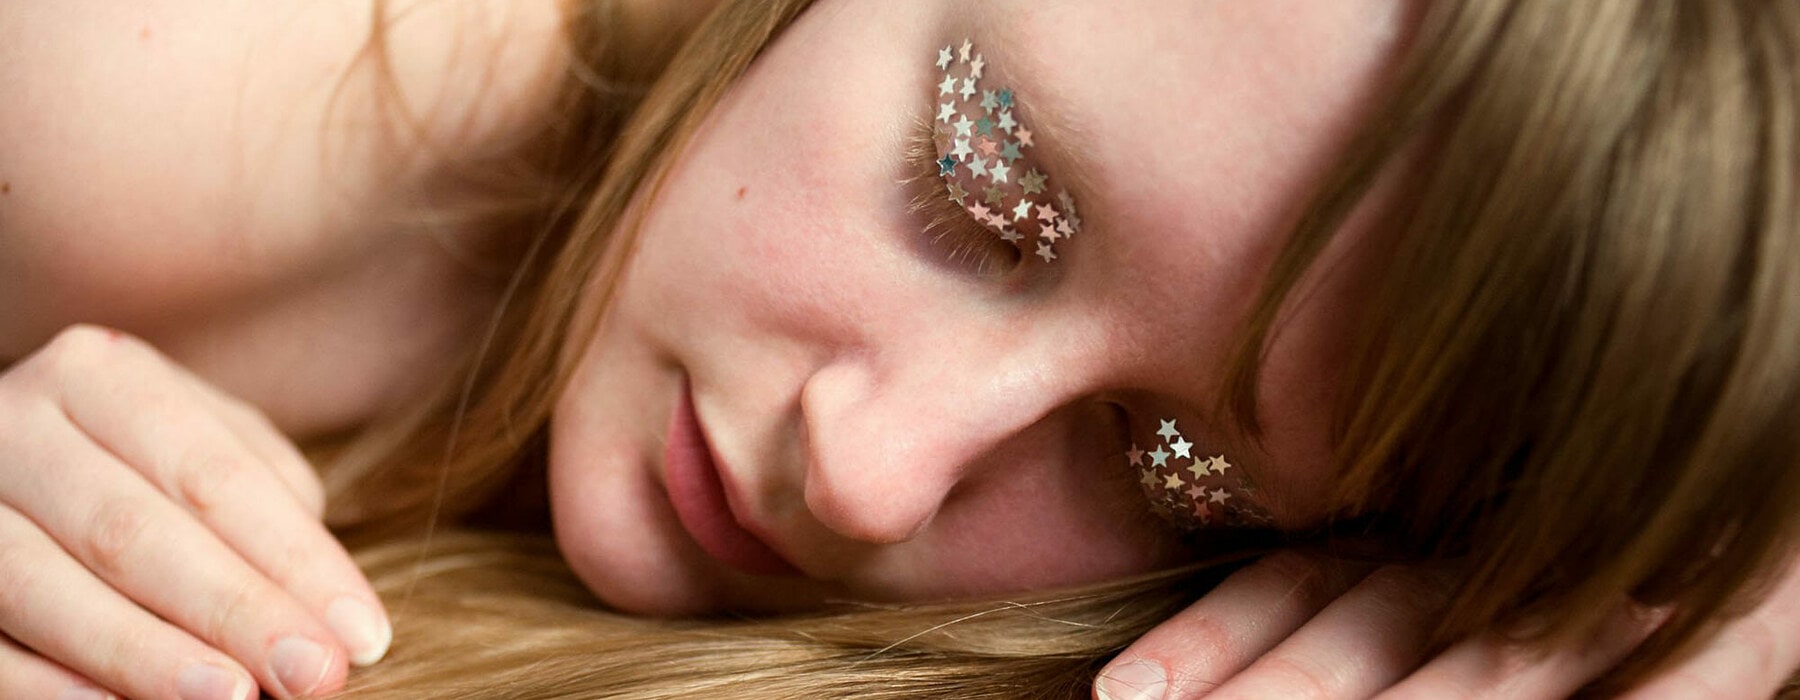 A young blonde woman laying on a silver floor. She is asleep and tiny silver stars cover her eyelids to represent dreams and dreaming.